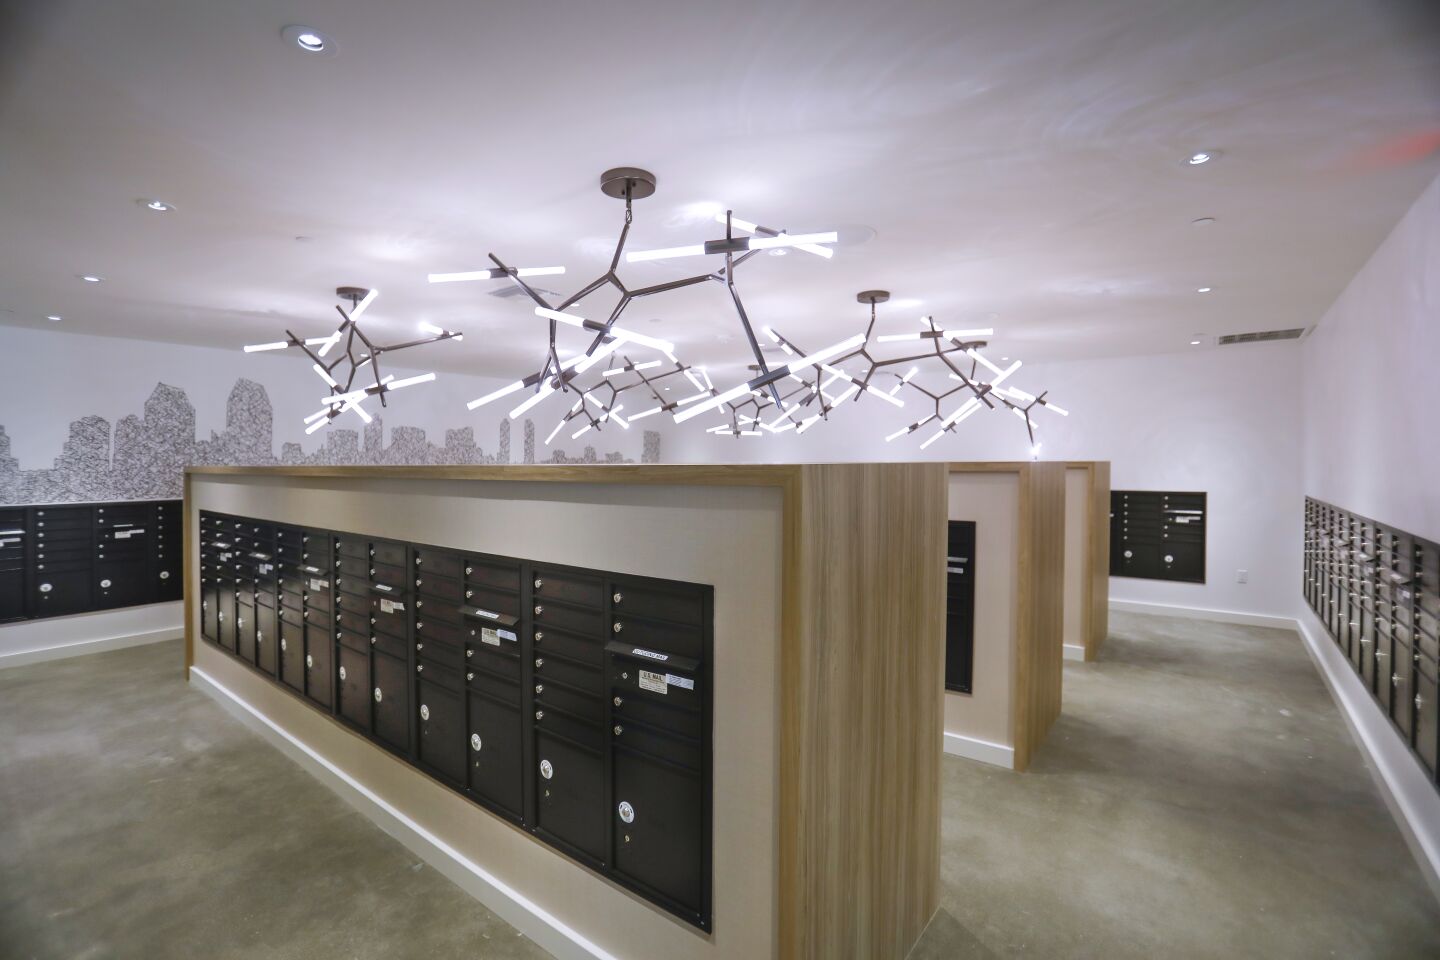 A light sculpture is above the mail boxes in the mail lounge at One Paseo, the upscale apartment homes project in Carmel Valley, part of the 23-acre mixed-use project. Photographed October 8, 2019, in San Diego, California.